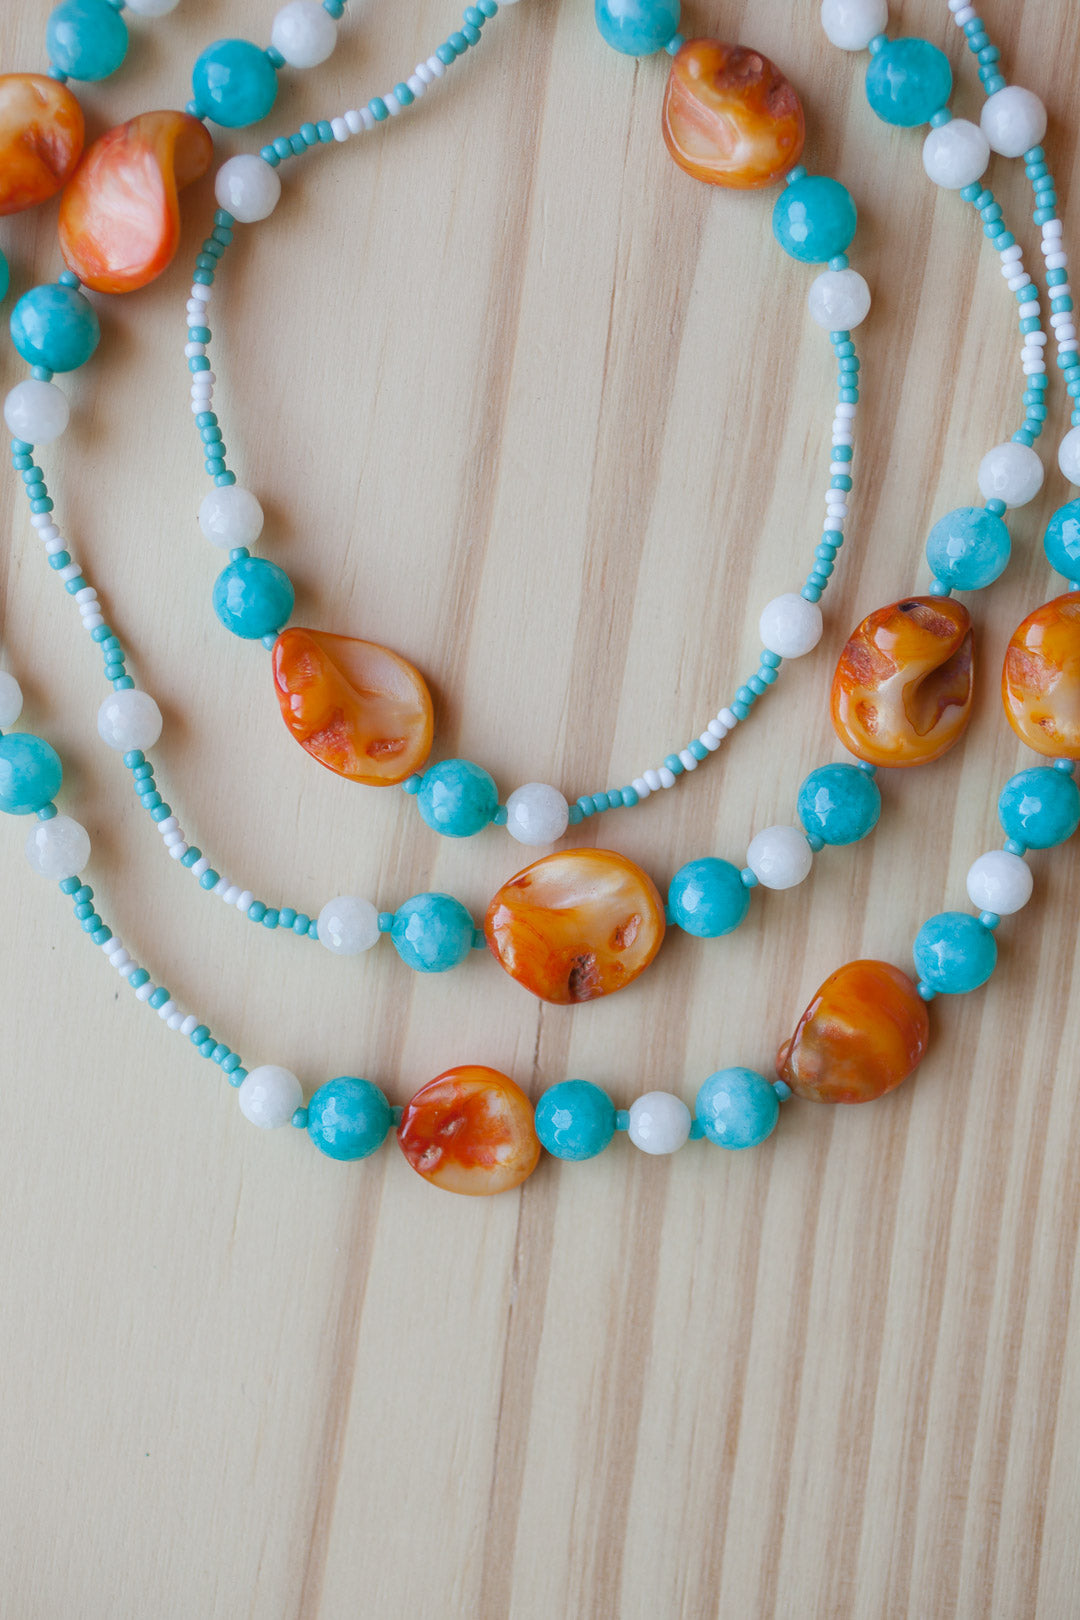 60" Extra Long Orange Shell Beaded Necklace with Turquoise & White Agate Beads